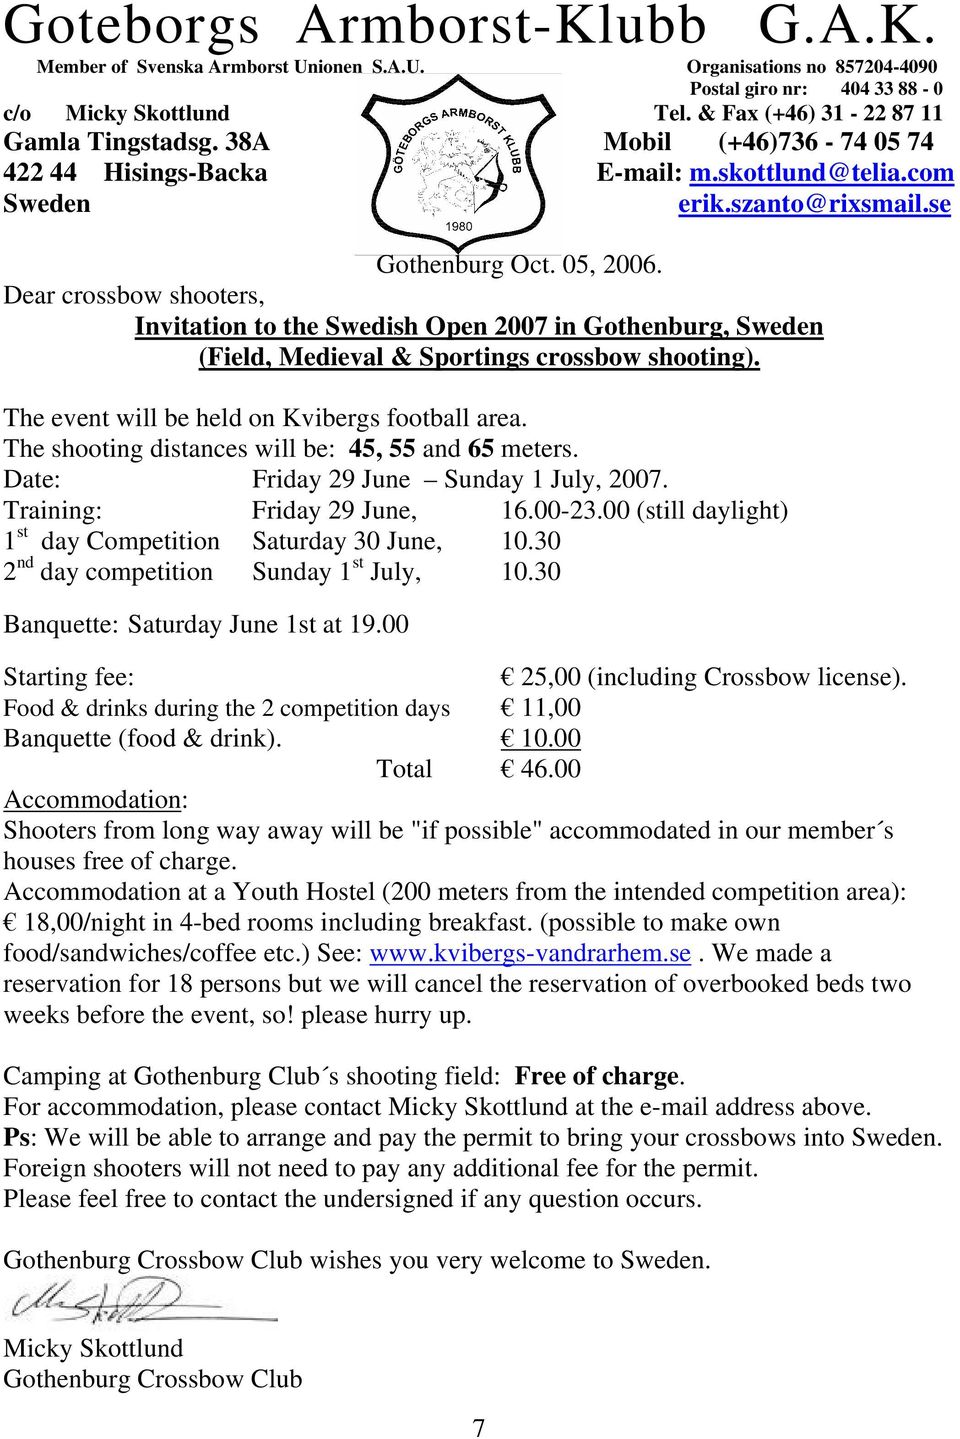 Dear crossbow shooters, Invitation to the Swedish Open 2007 in Gothenburg, Sweden (Field, Medieval & Sportings crossbow shooting). The event will be held on Kvibergs football area.